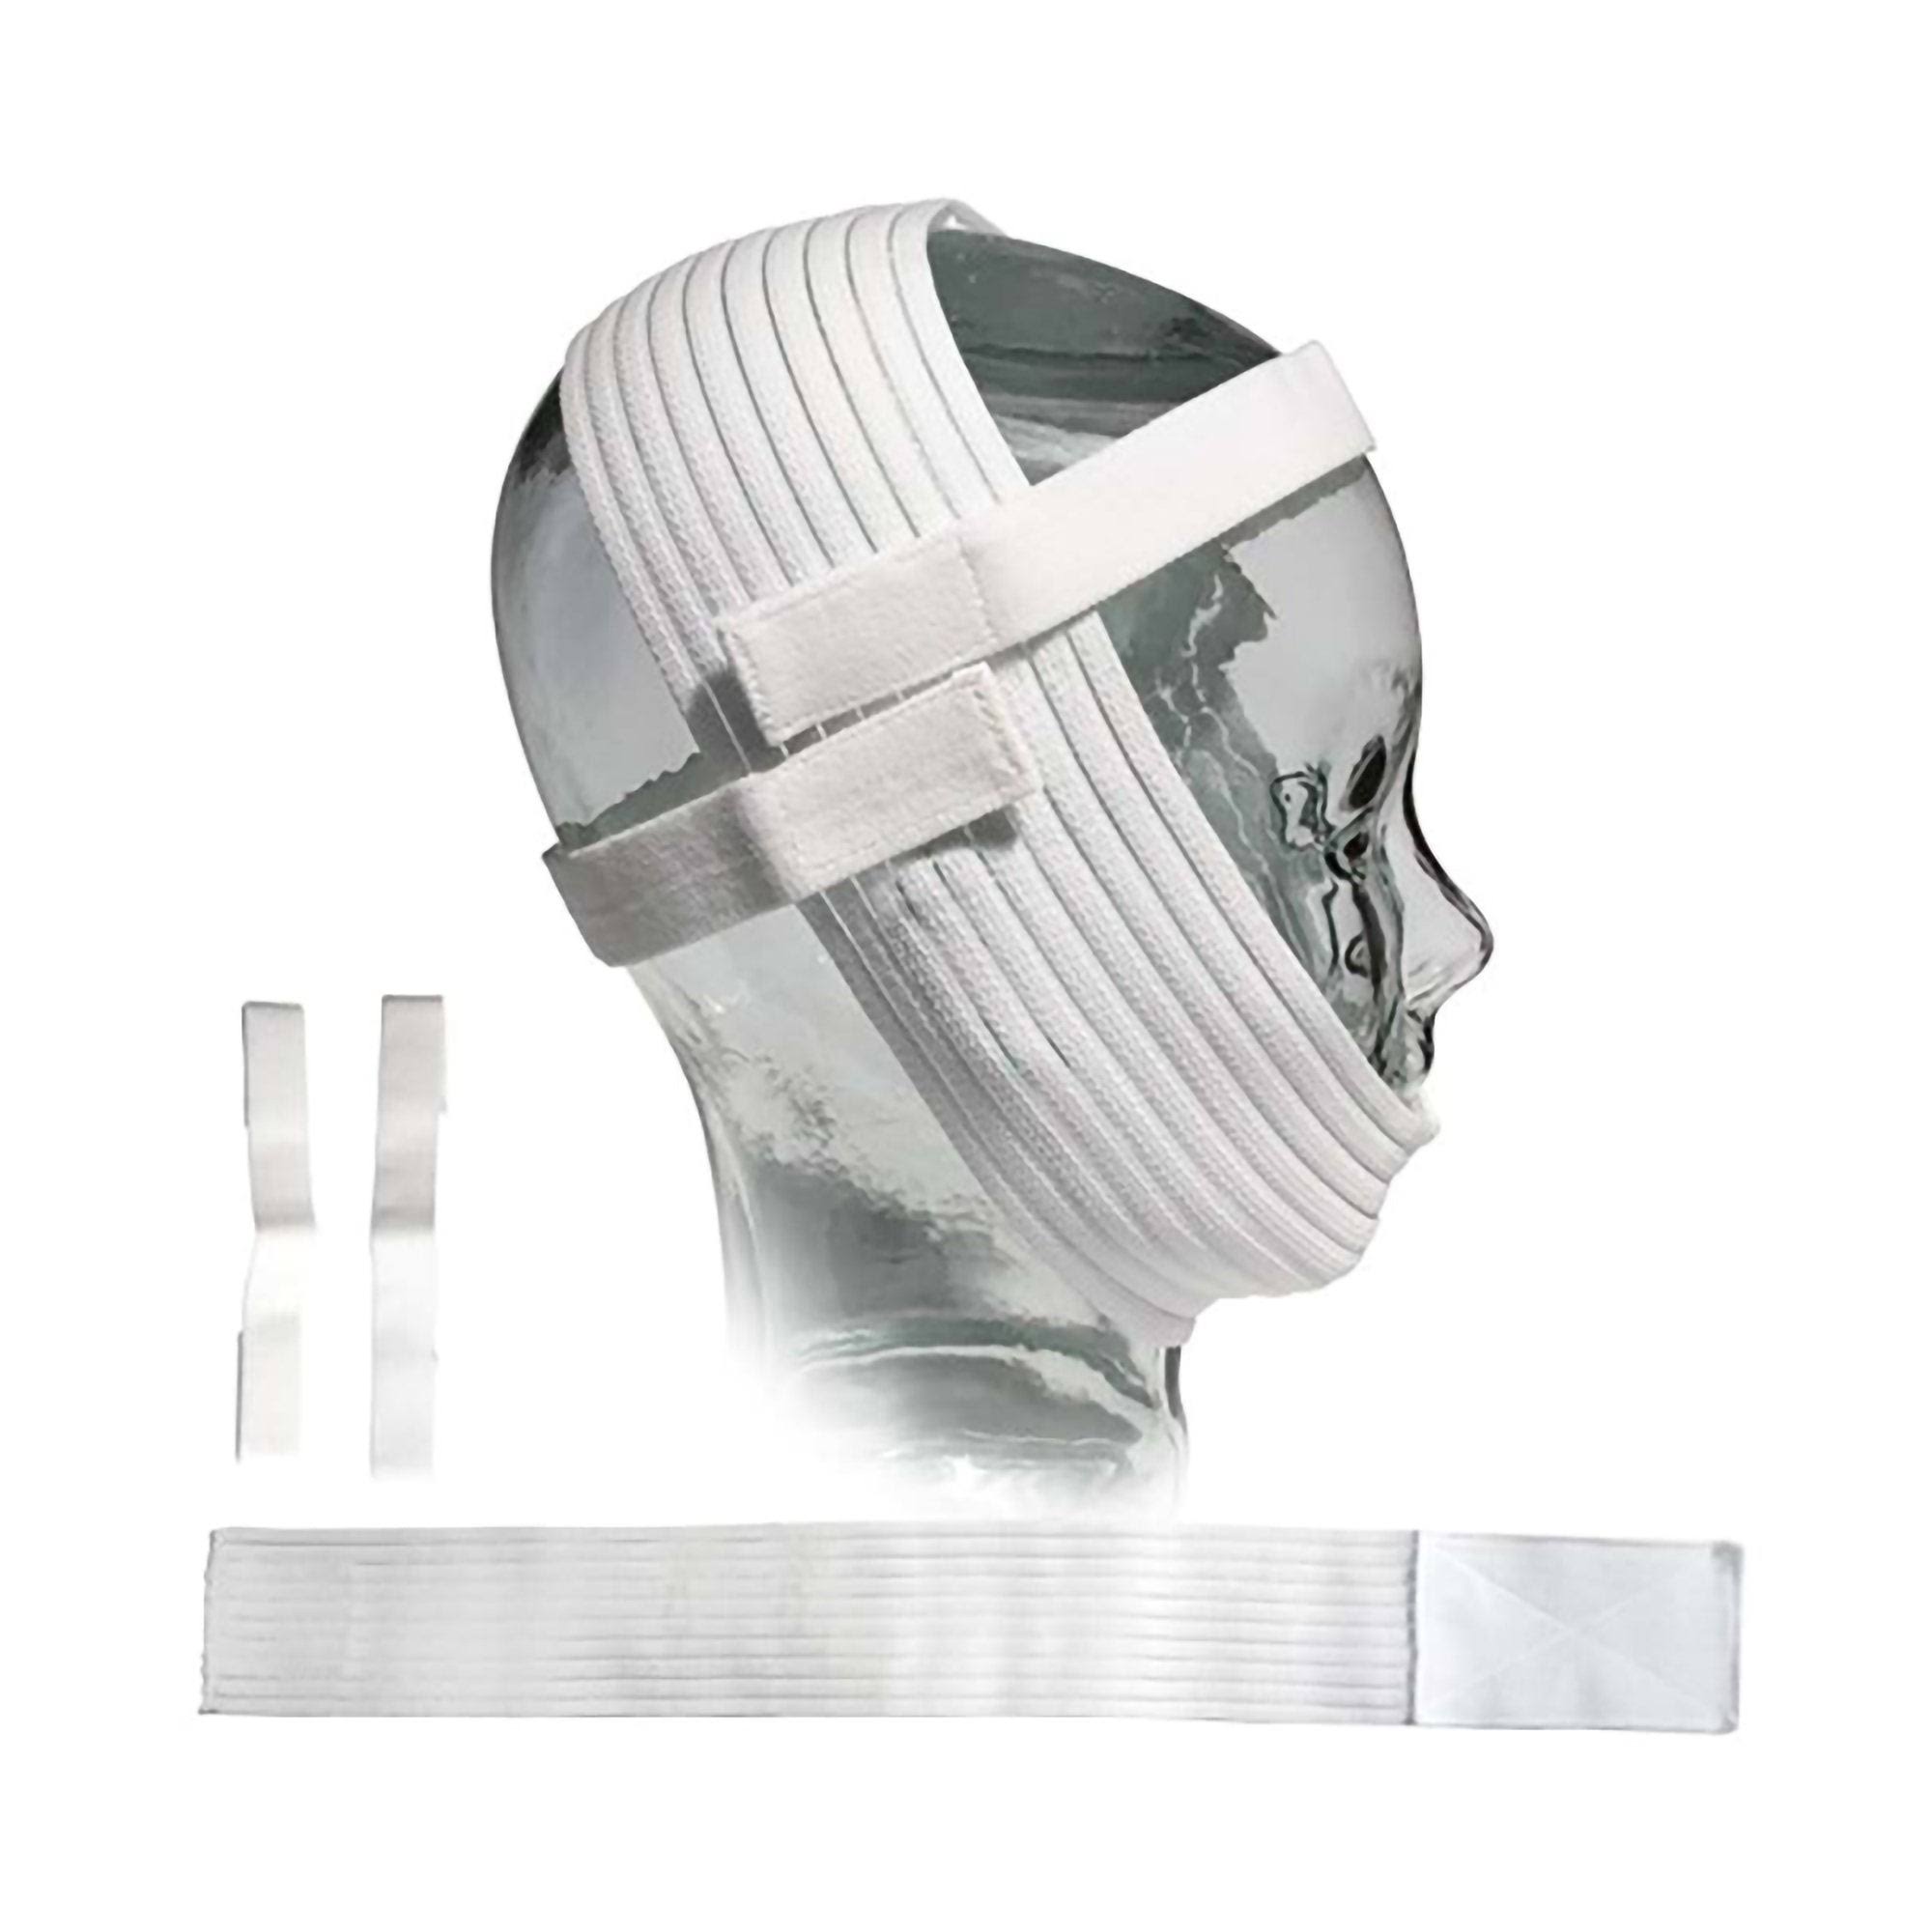 Sunset Healthcare Deluxe Chin Strap - Large